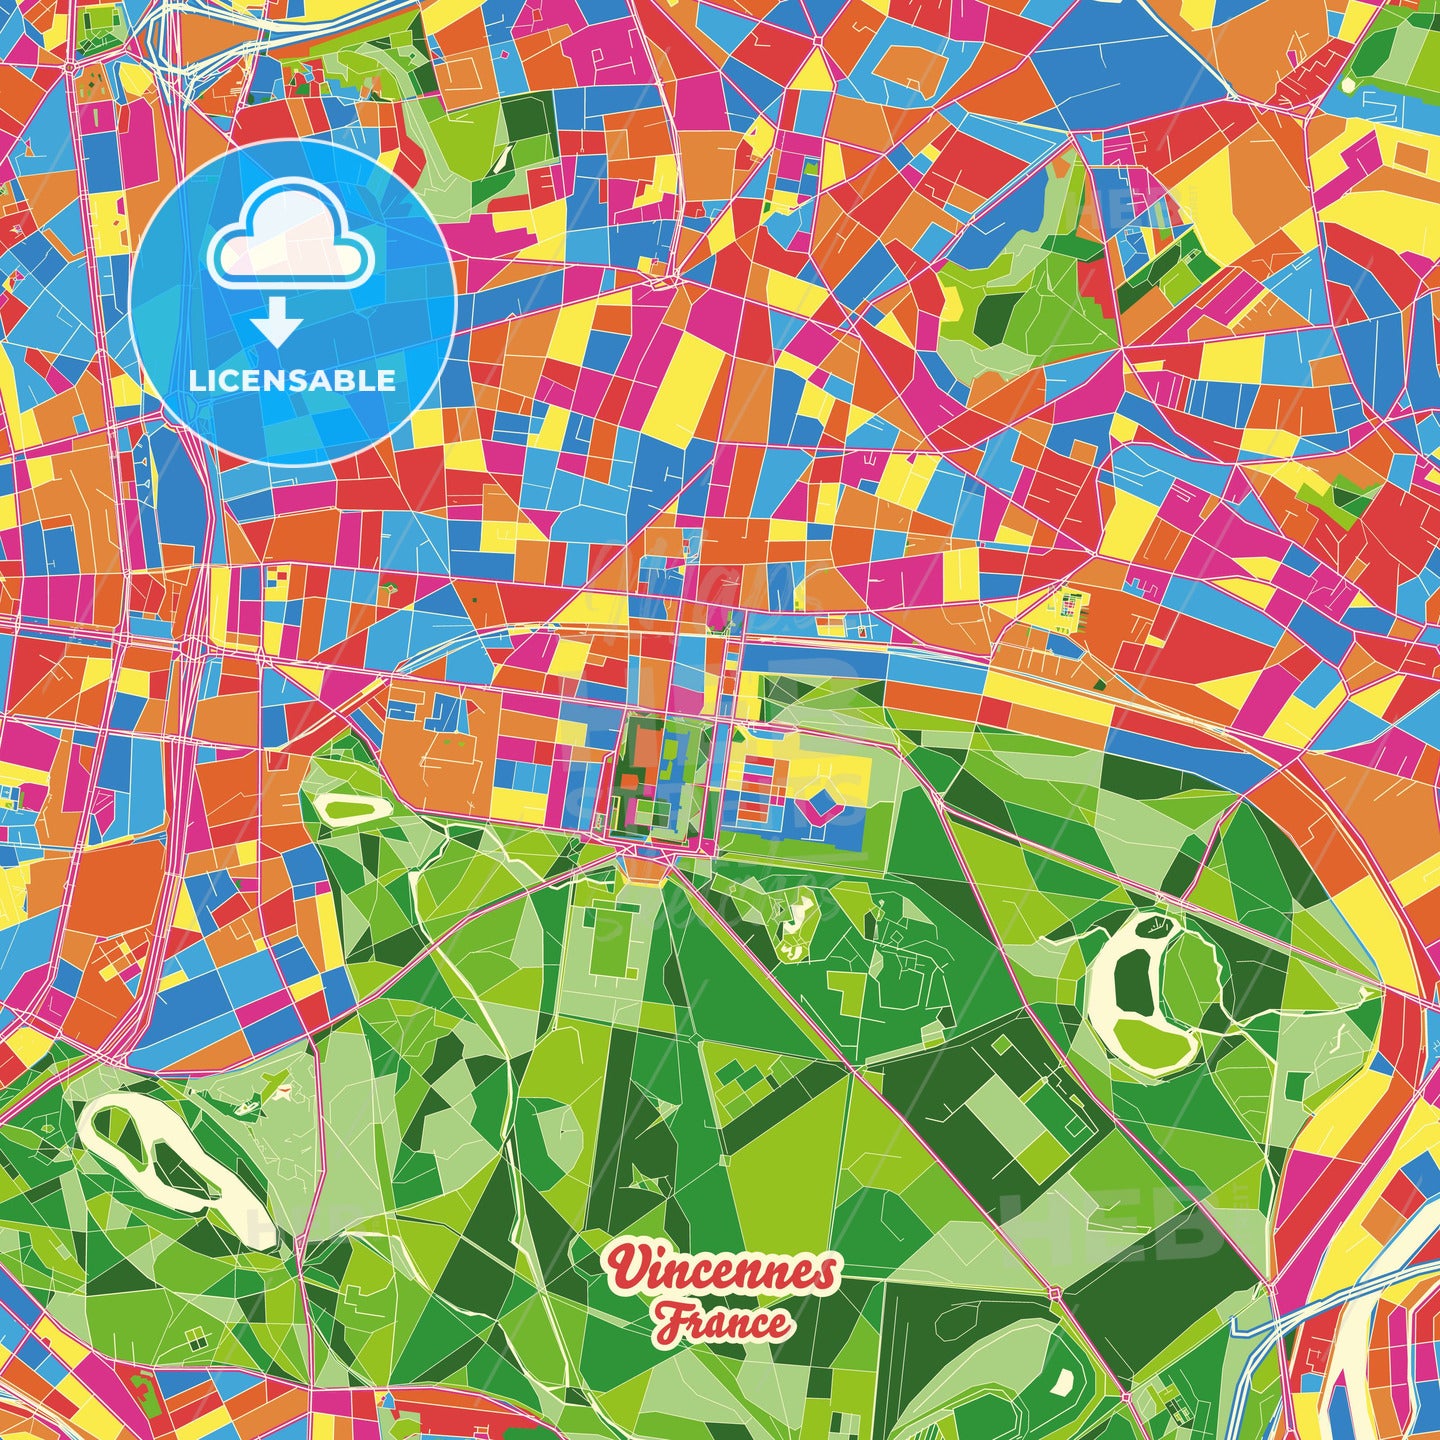 Vincennes, France Crazy Colorful Street Map Poster Template - HEBSTREITS Sketches